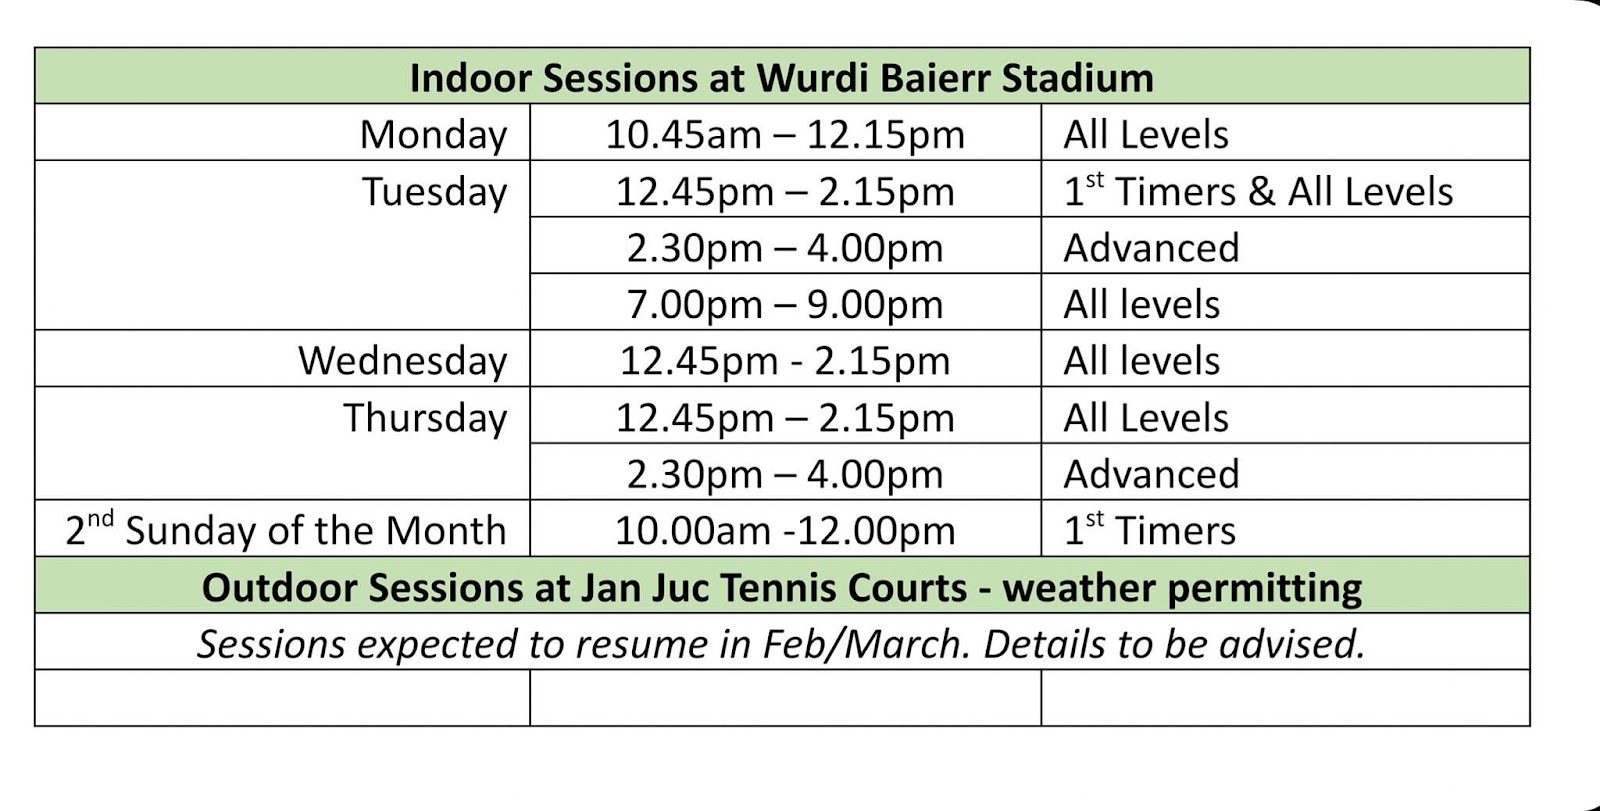 May be an image of text that says "Wednesday Thursday Indoor Sessions at Wurdi Baierr Stadium Monday 10.45am- All Levels Tuesday 12.45pm-2.15pm 1st Timers & All Levels 2.30pm-4.00pm Advanced All levels 12.45pm All levels 12.45pm-2.15pm All Levels 2.30pm- Advanced 2nd Sunday of the Month 10.00am -12.00pm 1s Timers Outdoor Sessions at Jan Juc Tennis Courts- weather permitting Sessions expected to resume in Feb/March. Details to be advised."